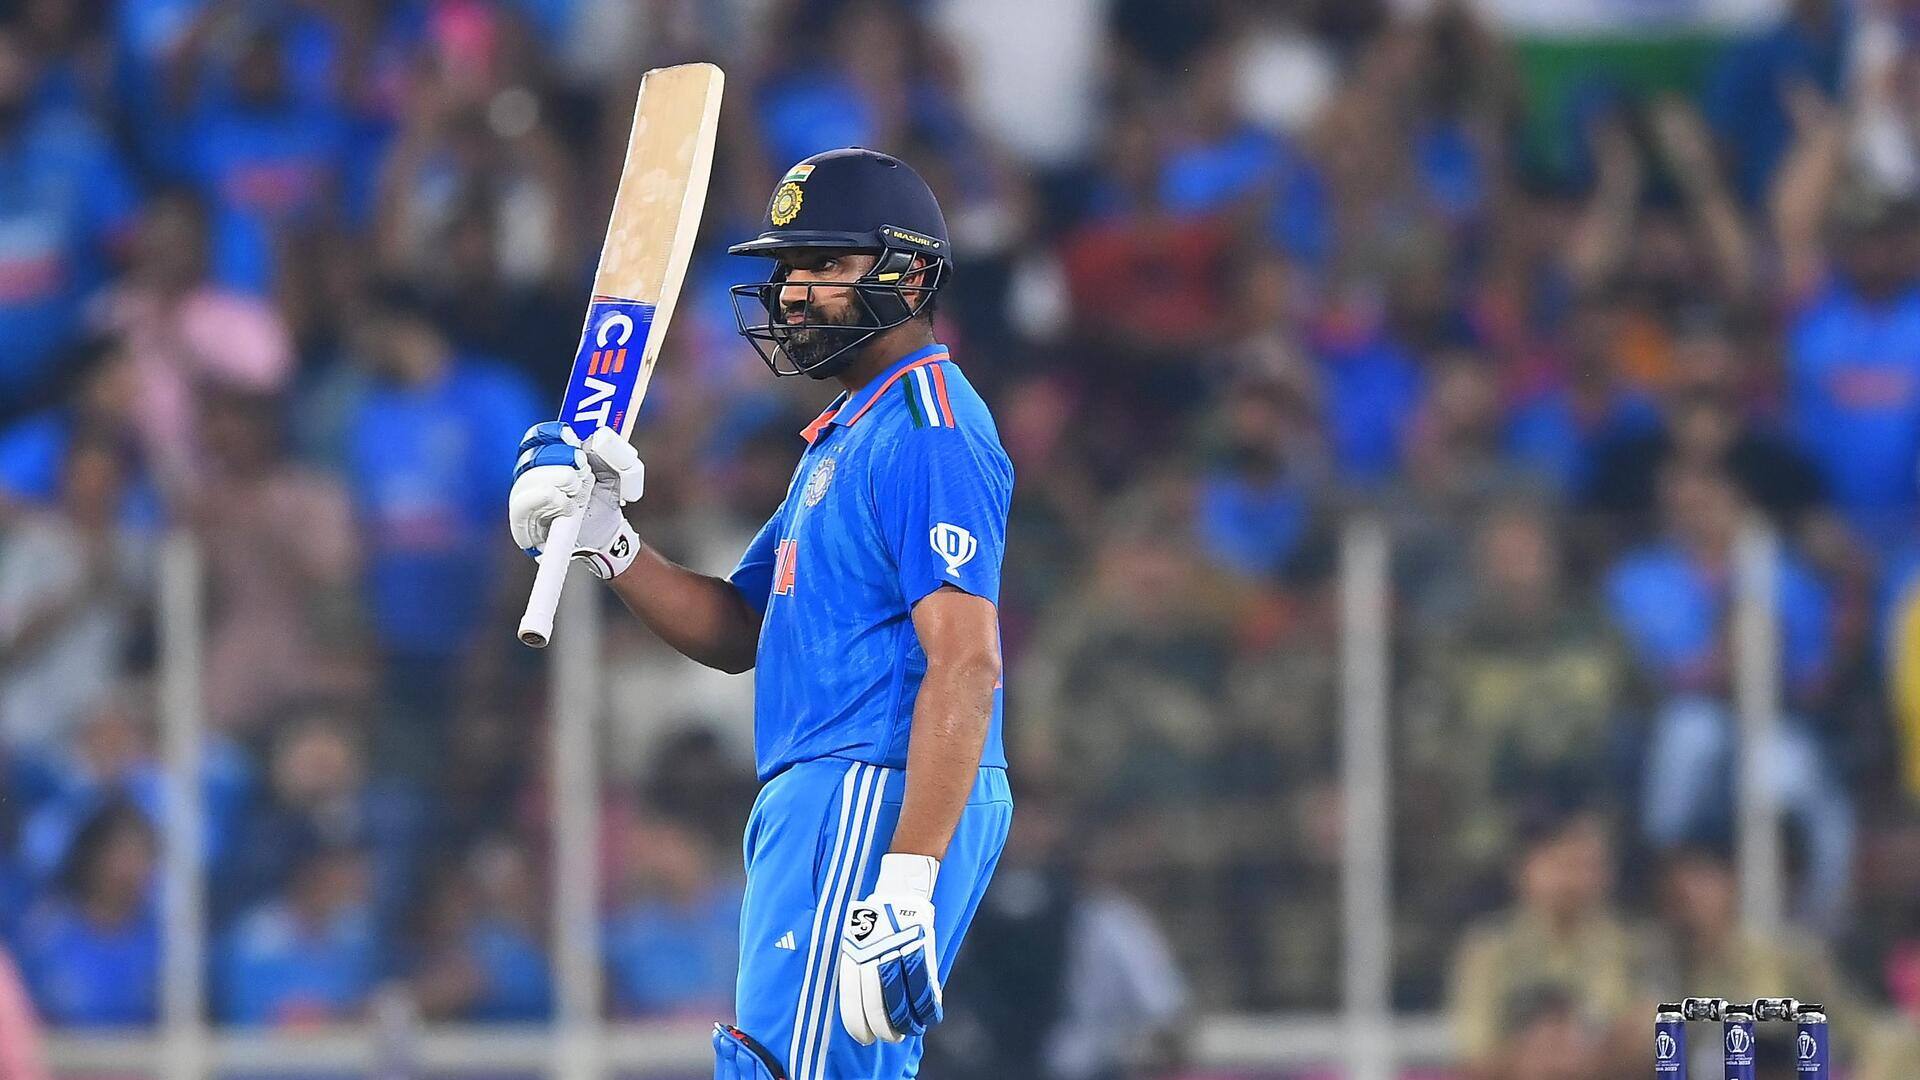 Rohit Sharma races to 200 ODI sixes in Asia: Stats